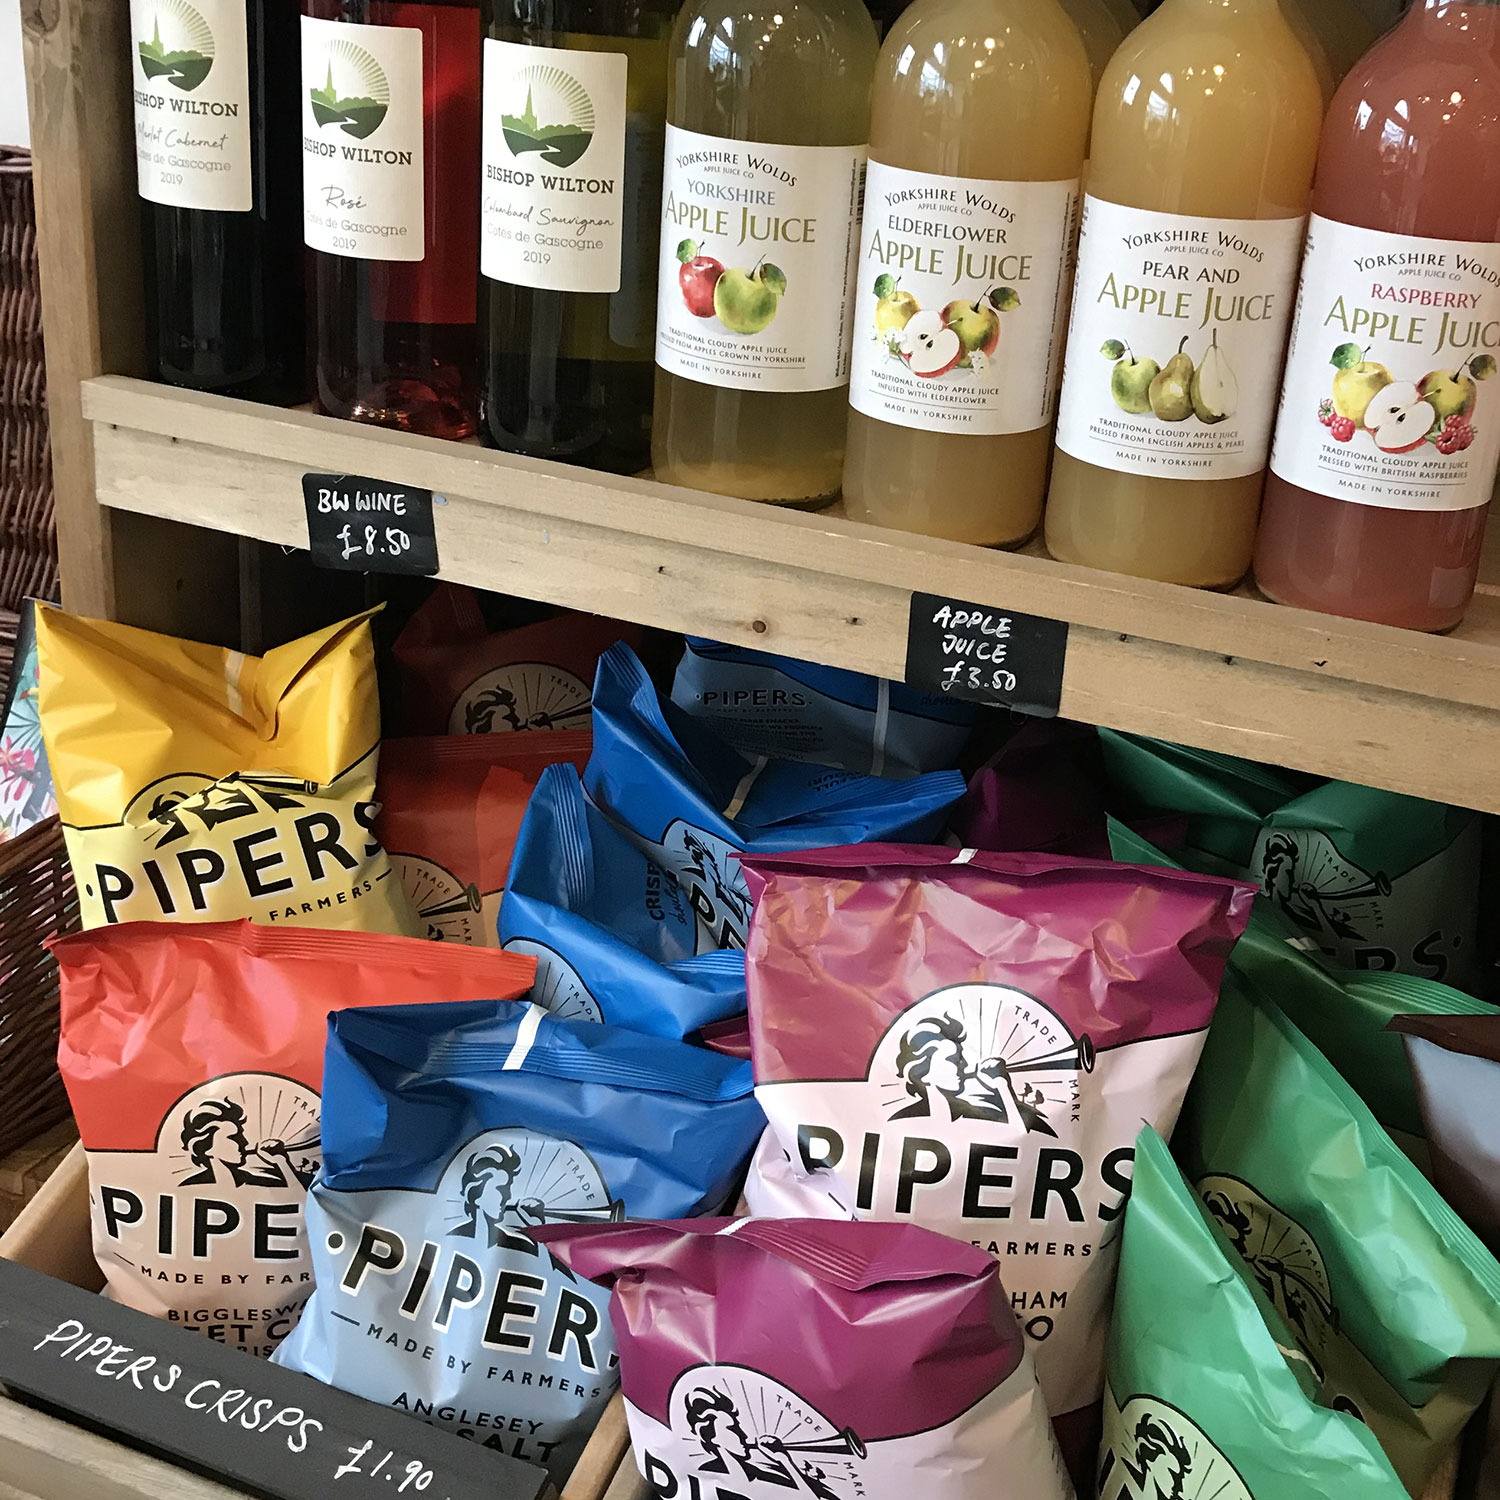 Pipers Crisps, Bishop Wilton Shop Wine and Yorkshire Wolds Apple Juice.